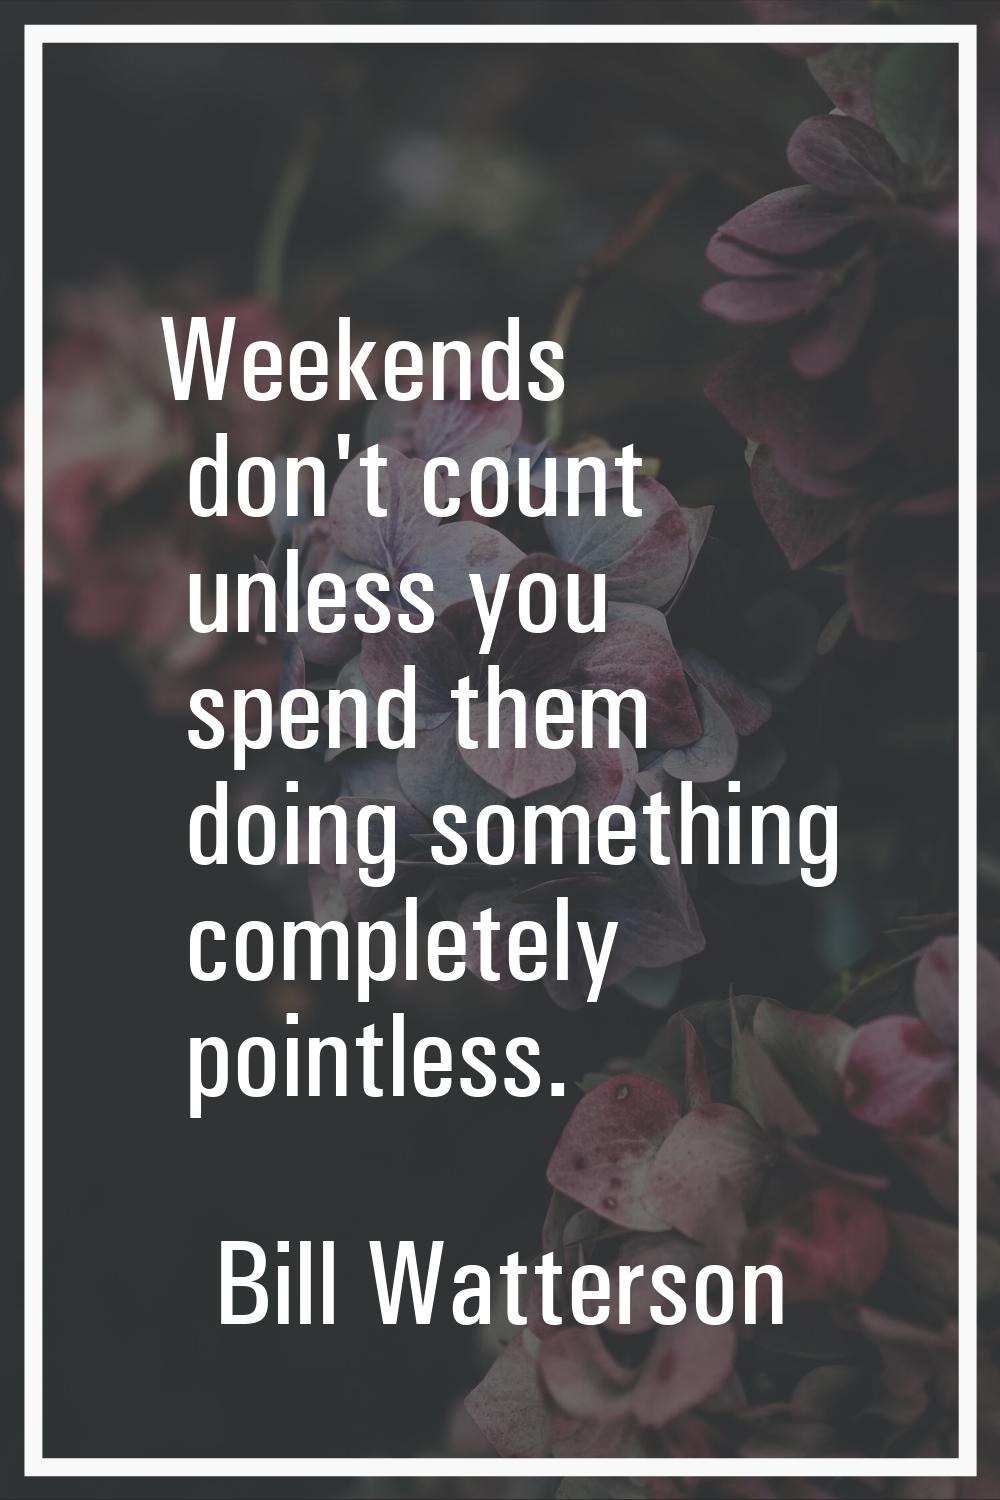 Weekends don't count unless you spend them doing something completely pointless.